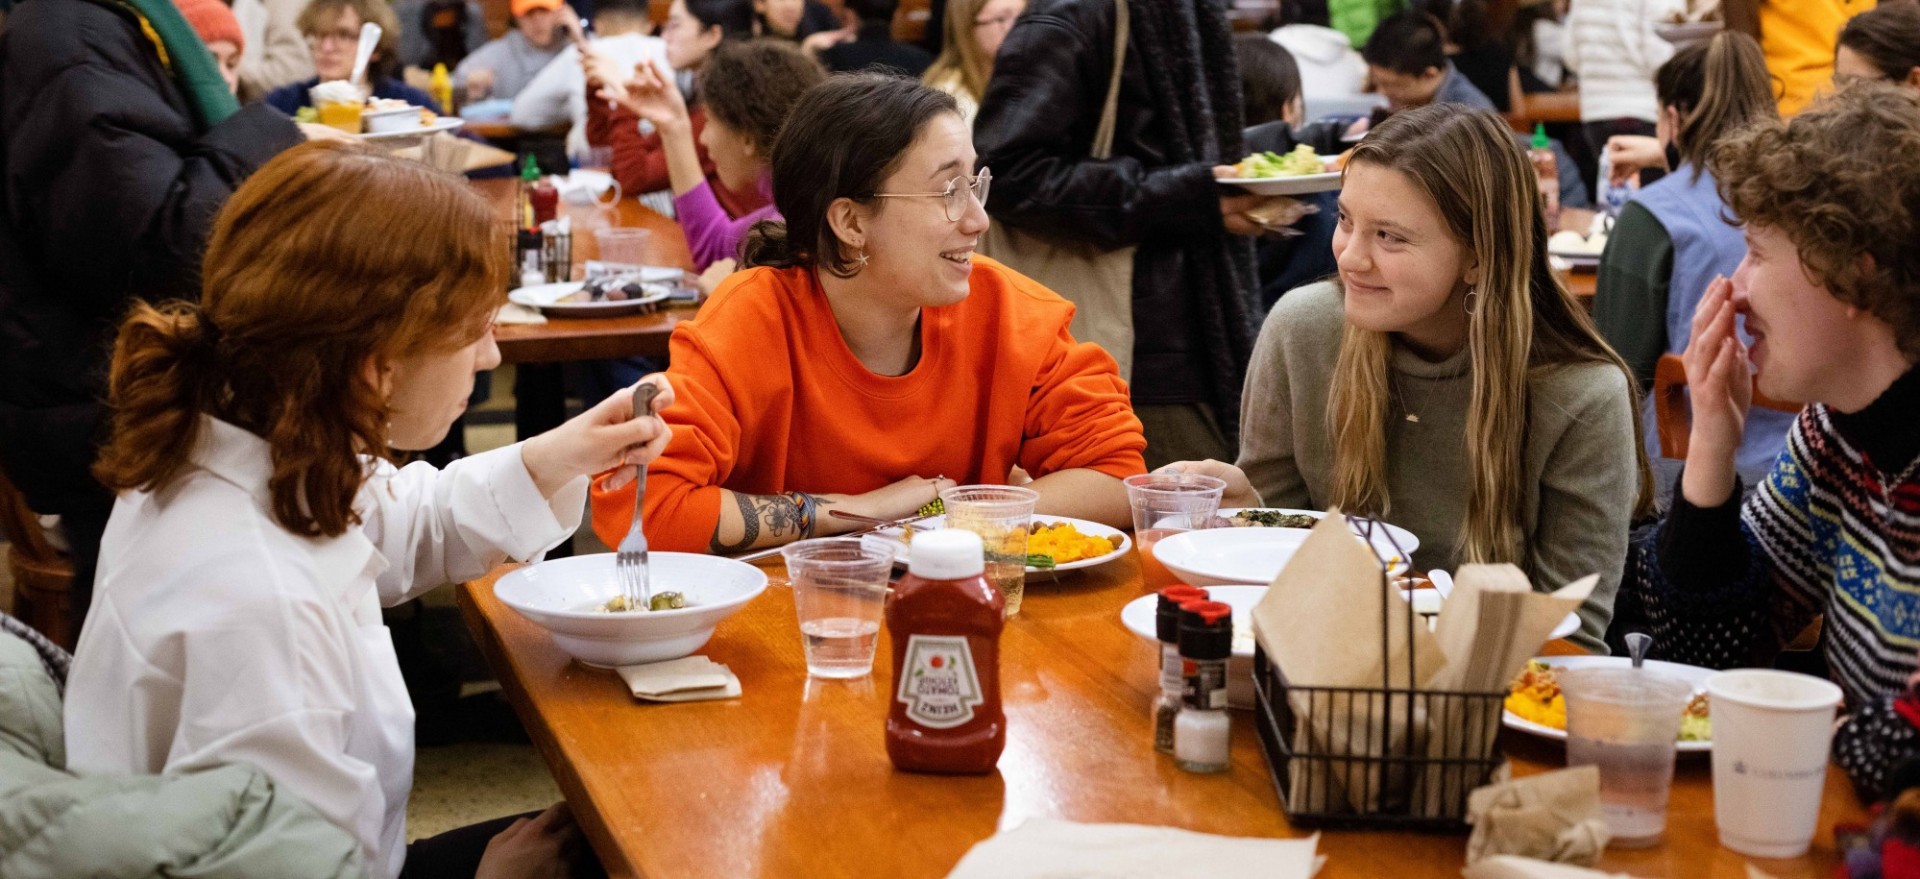 Four students laughing while eating in the dining hall